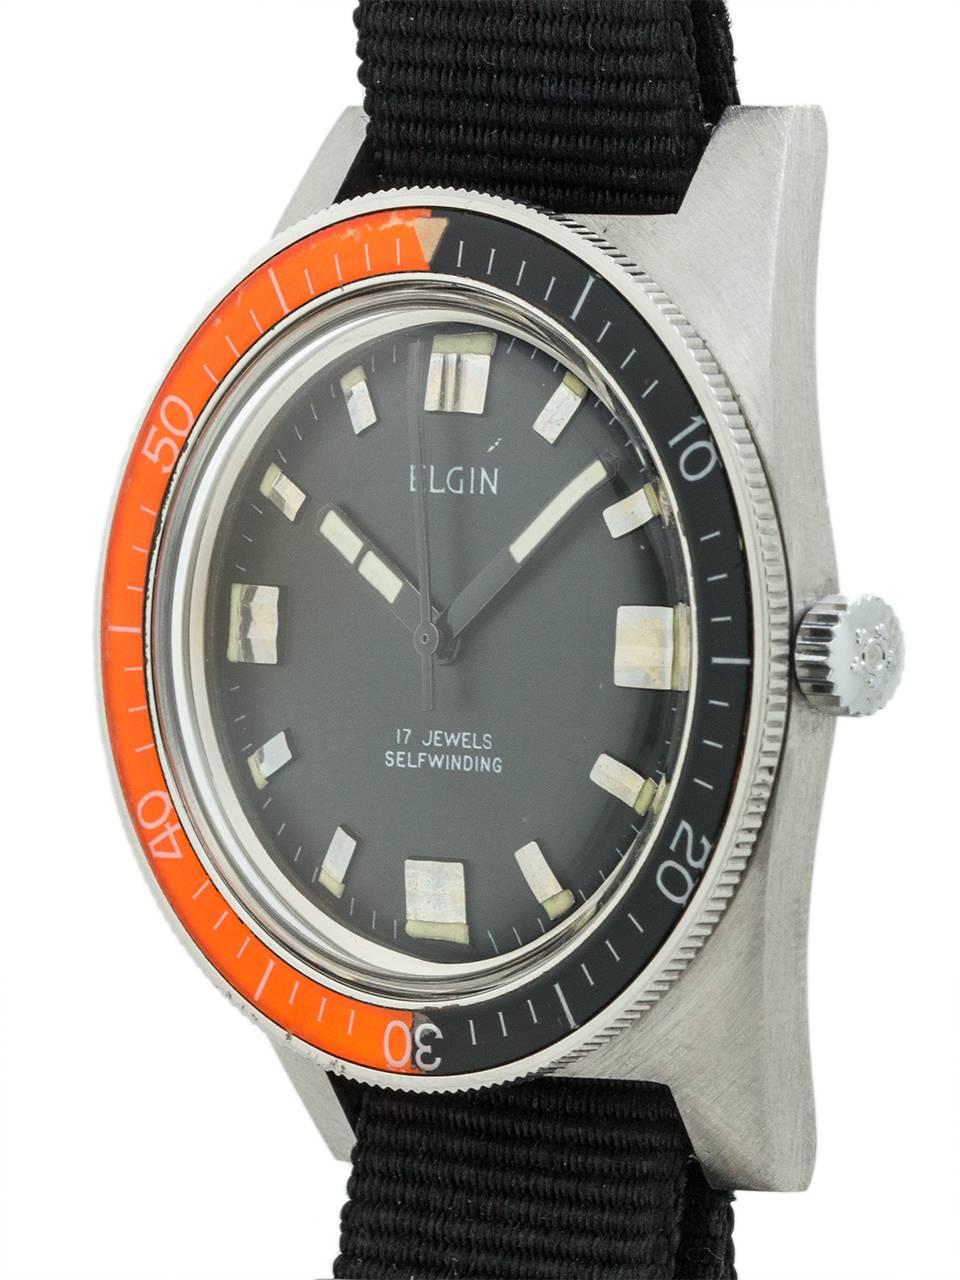 Exceptional condition example vintage Elgin diver’s model ref 4156 circa 1960’s. Featuring 37 x 46mm tonneau shaped case with screw down case back and great looking wide rotating bright reddish/orange and black elapsed time bakelite bezel, acrylic